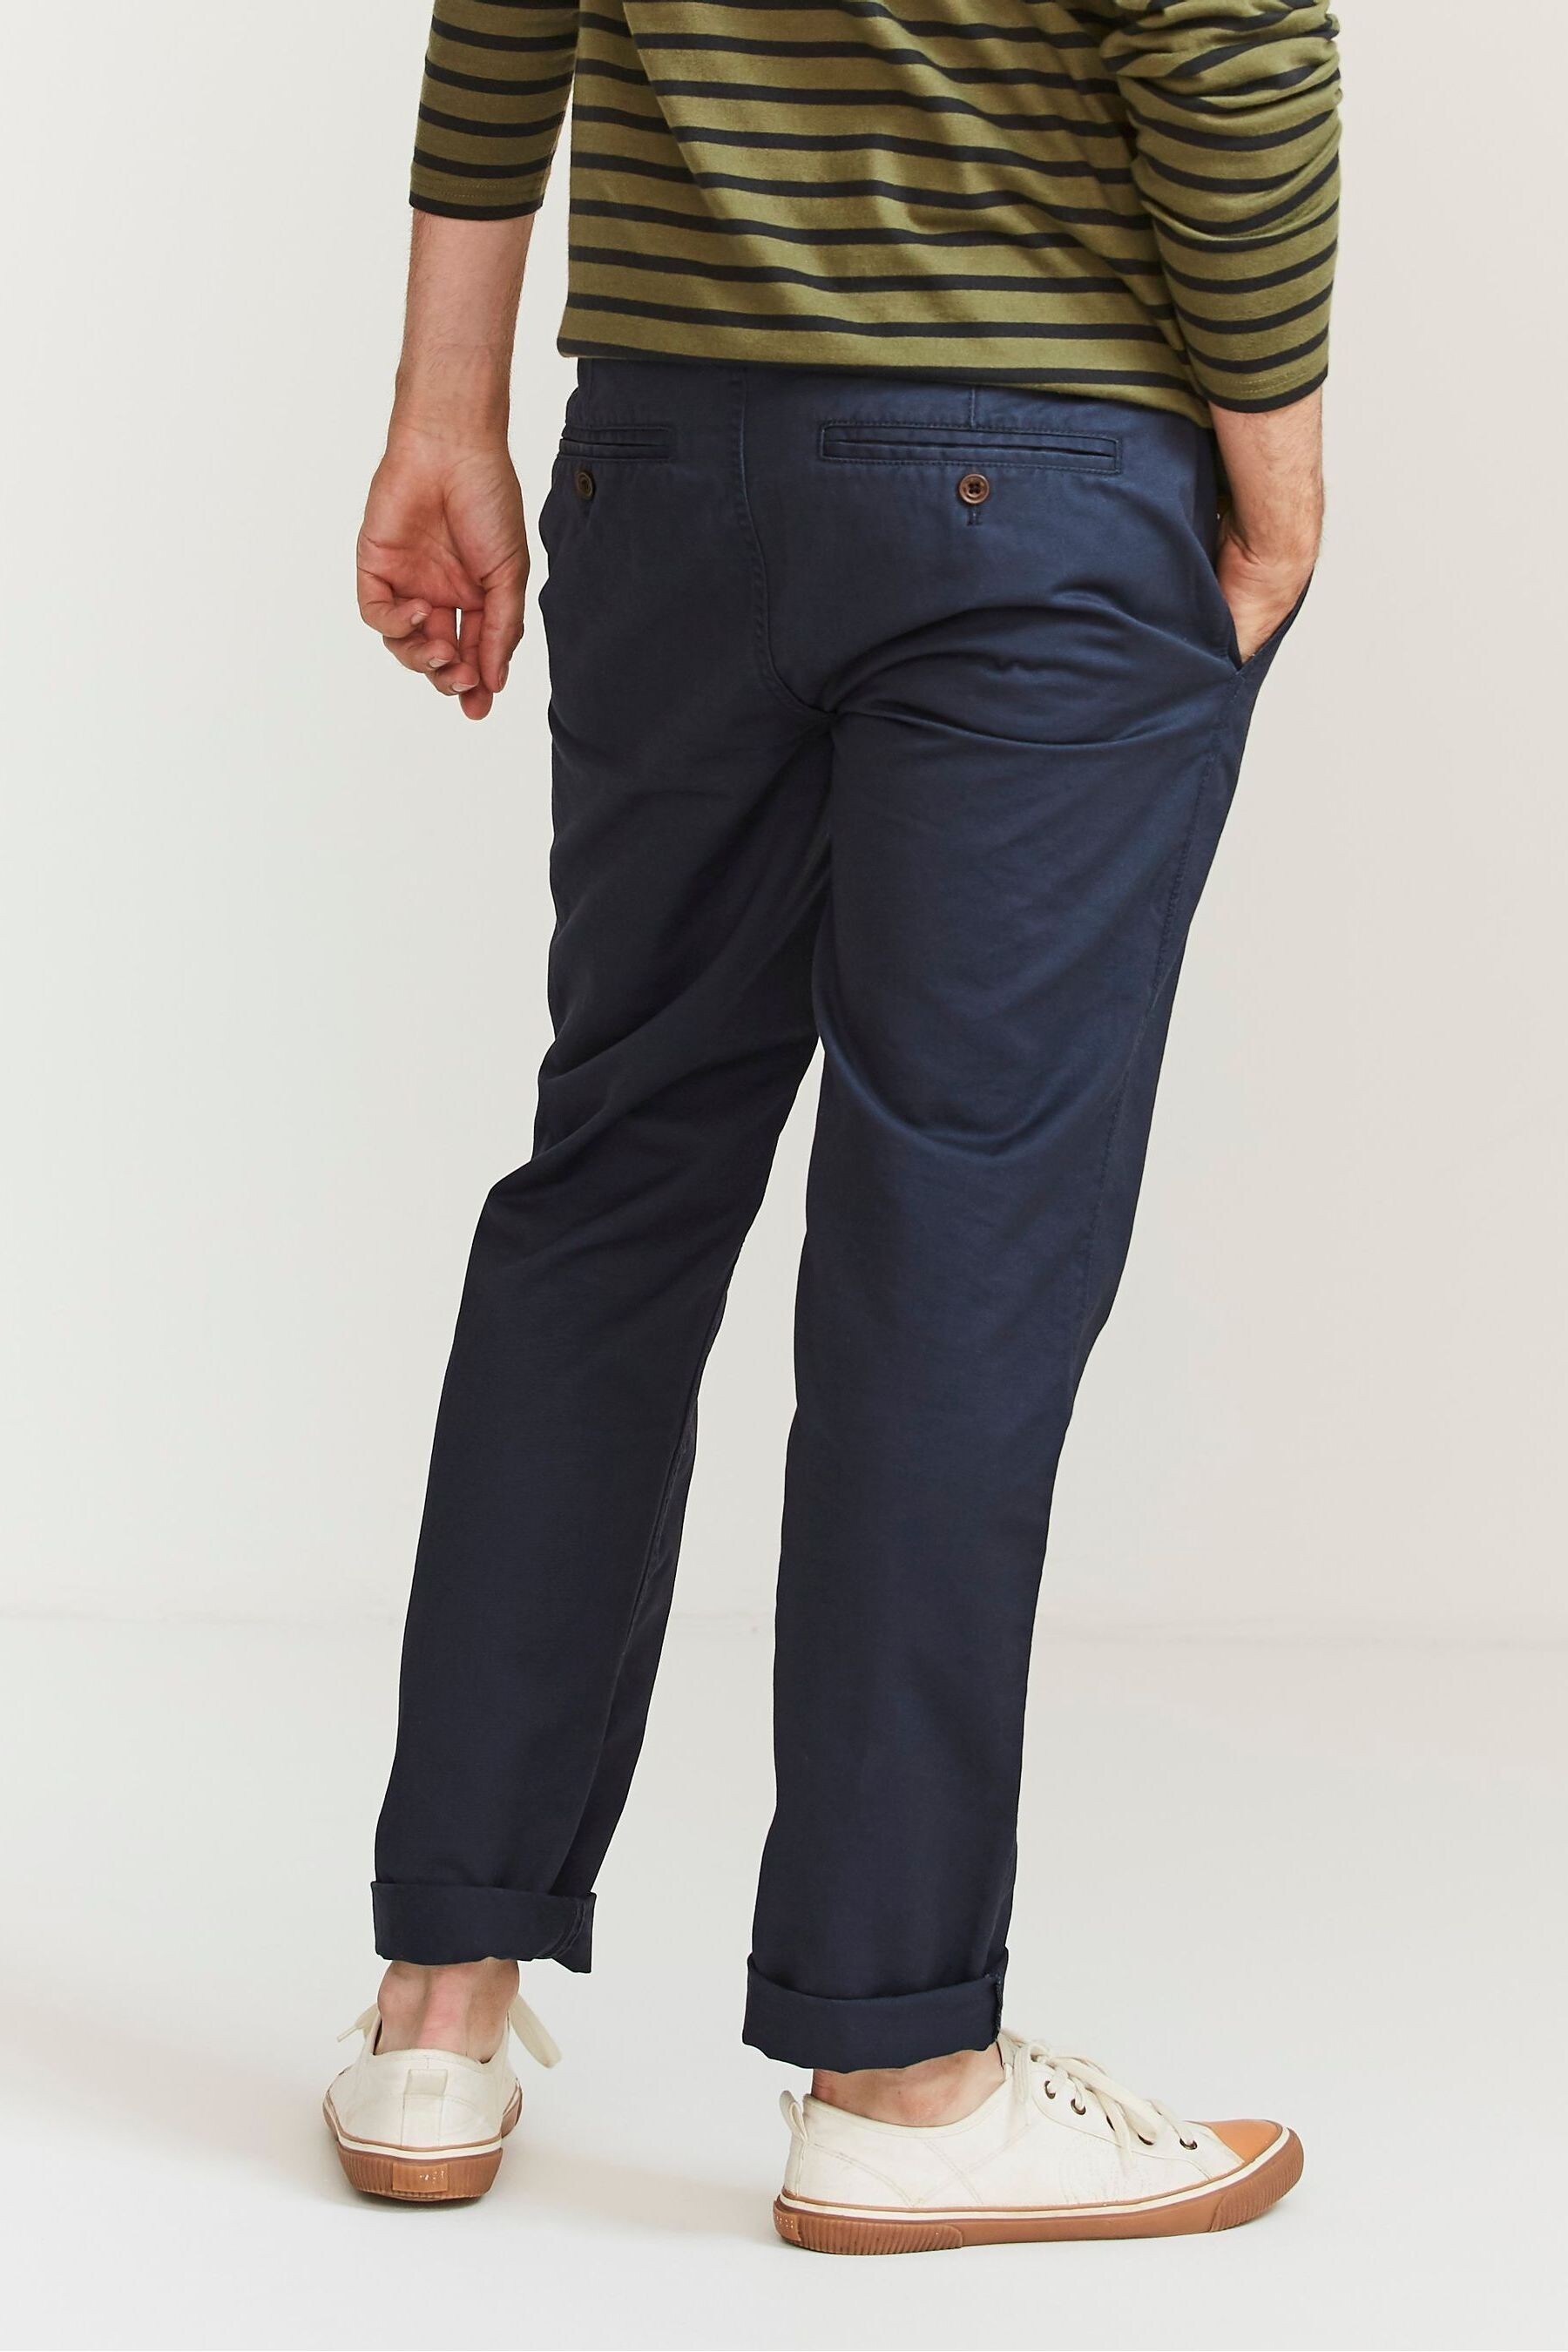 Buy FatFace Blue Modern Coastal Chinos from the Next UK online shop